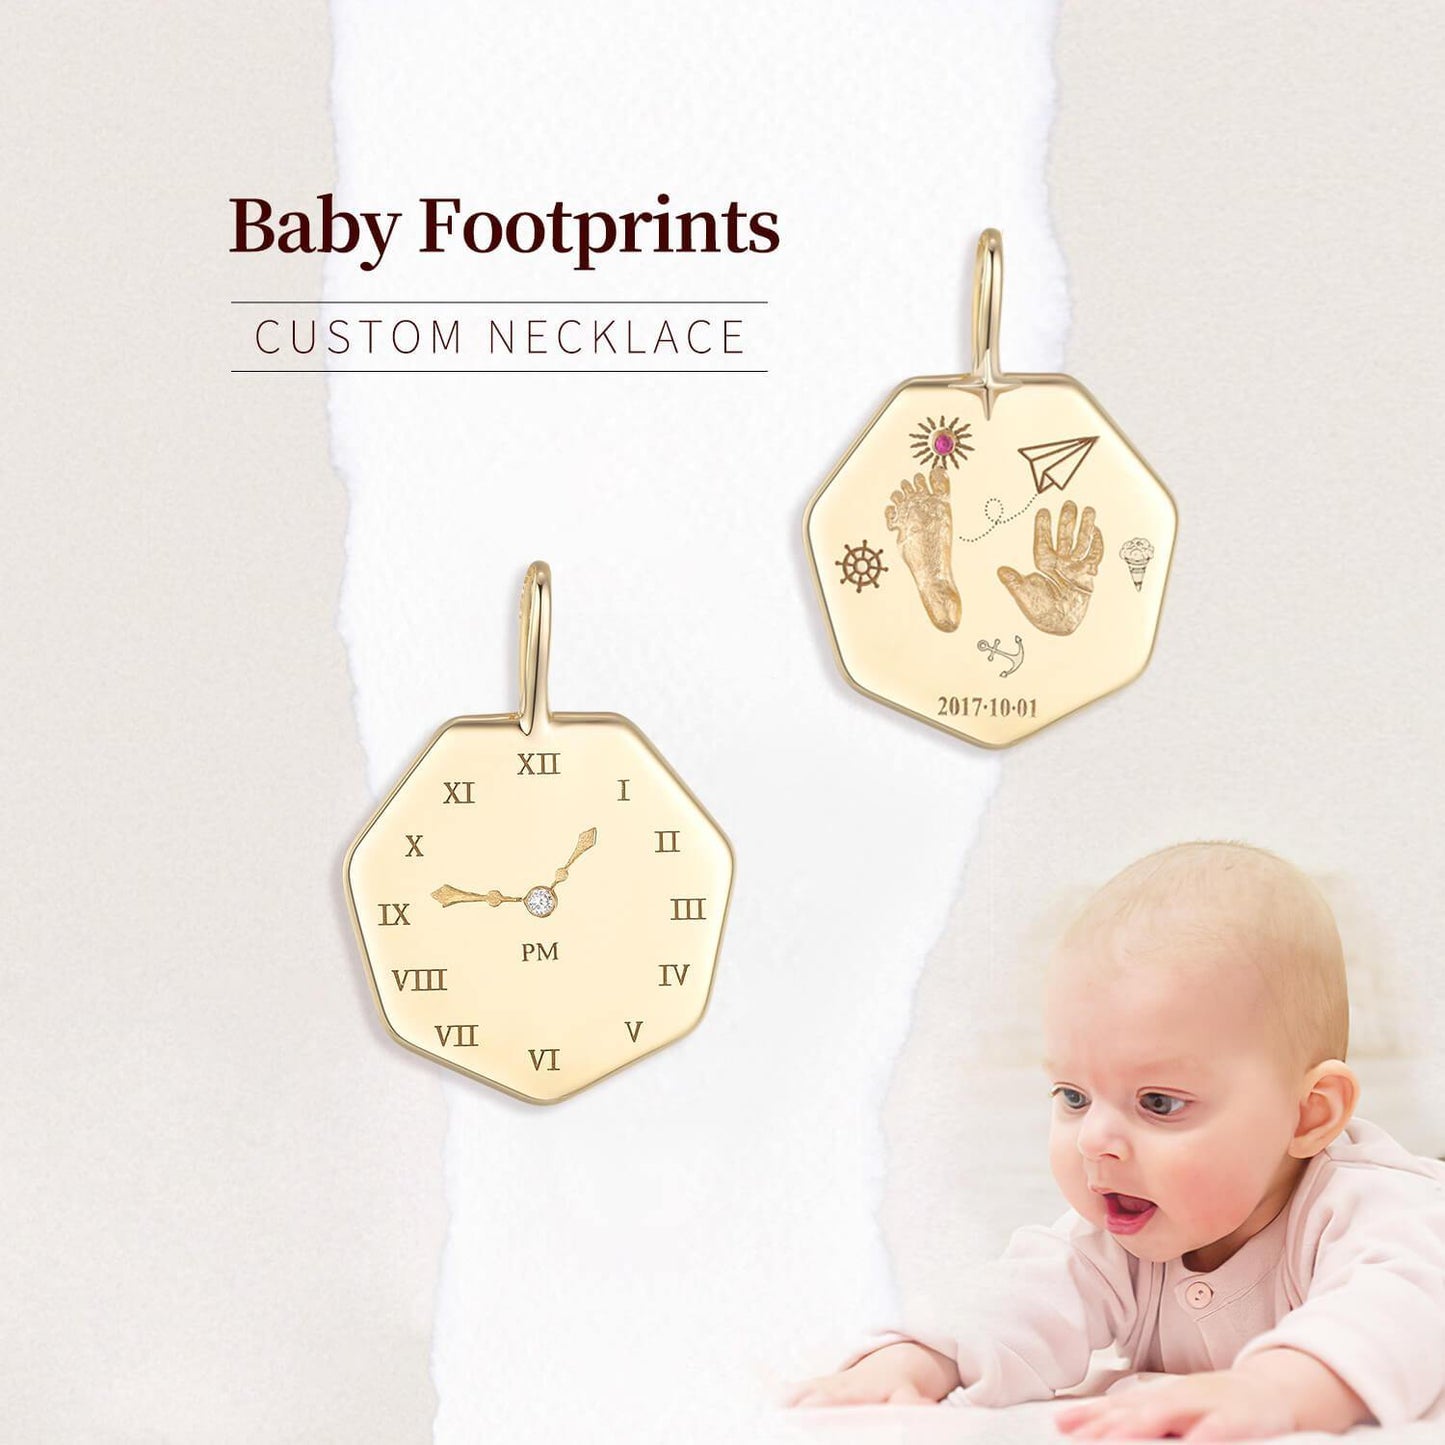 Baby and custom 18k gold baby footprints heptagonal necklace